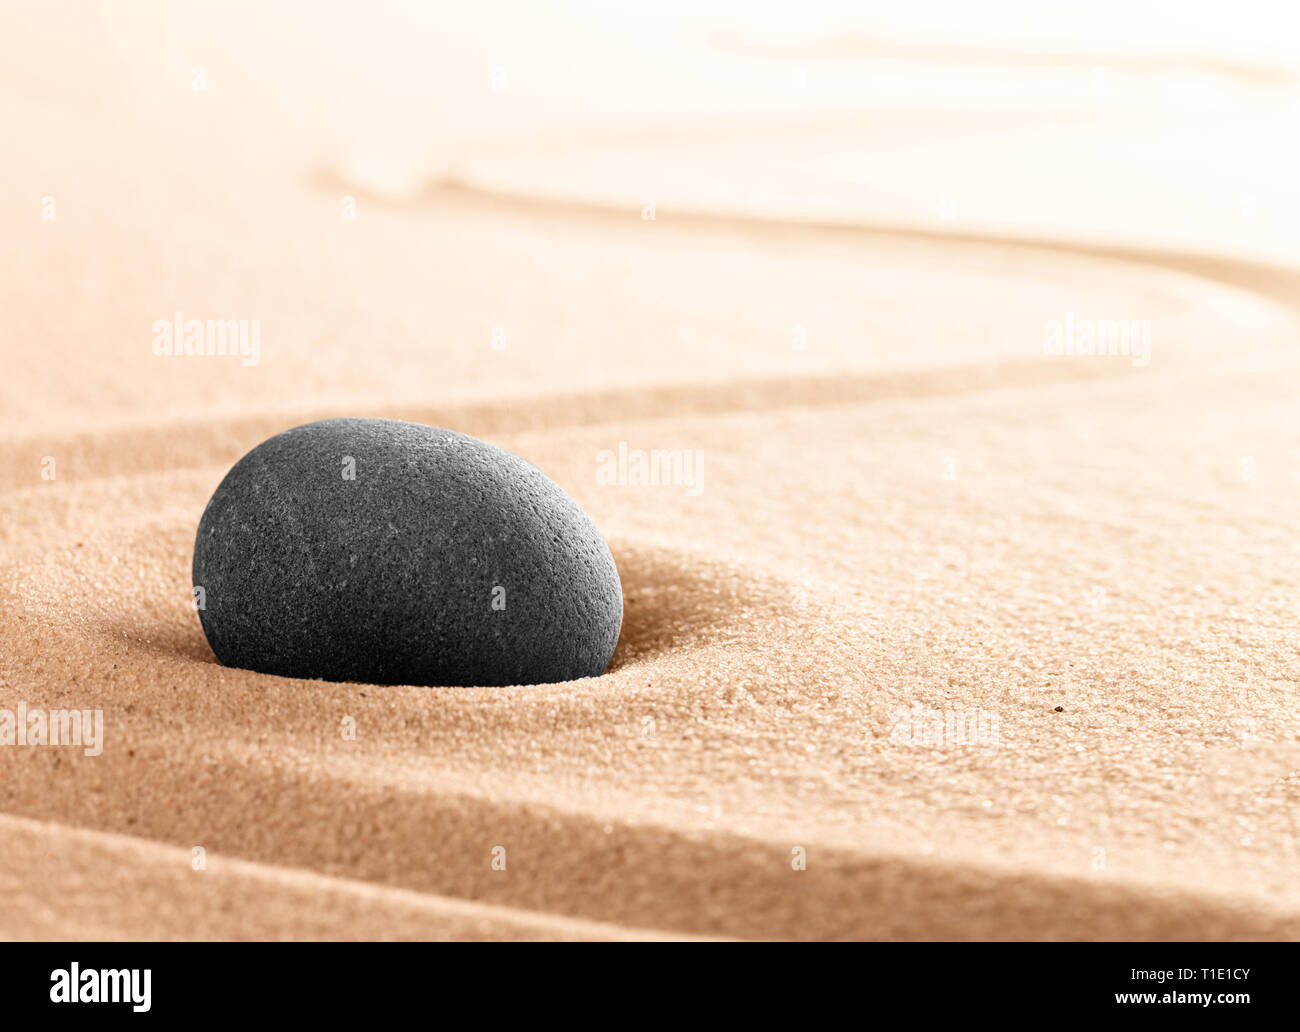 Spa wellness or mindfulness stone and sand garden. Concentration or focus point for spiritual balance and purity of mind and soul. Sandy background wi Stock Photo